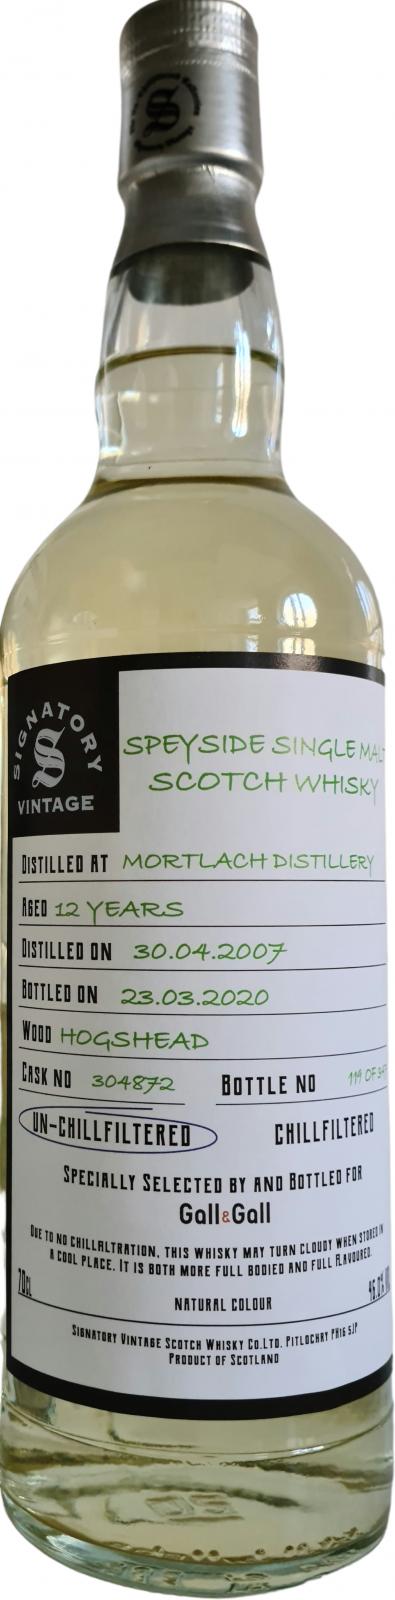 Mortlach 2007 SV The Un-Chillfiltered Collection Sherry Hogshead #304872 Gall & Gall 46% 700ml